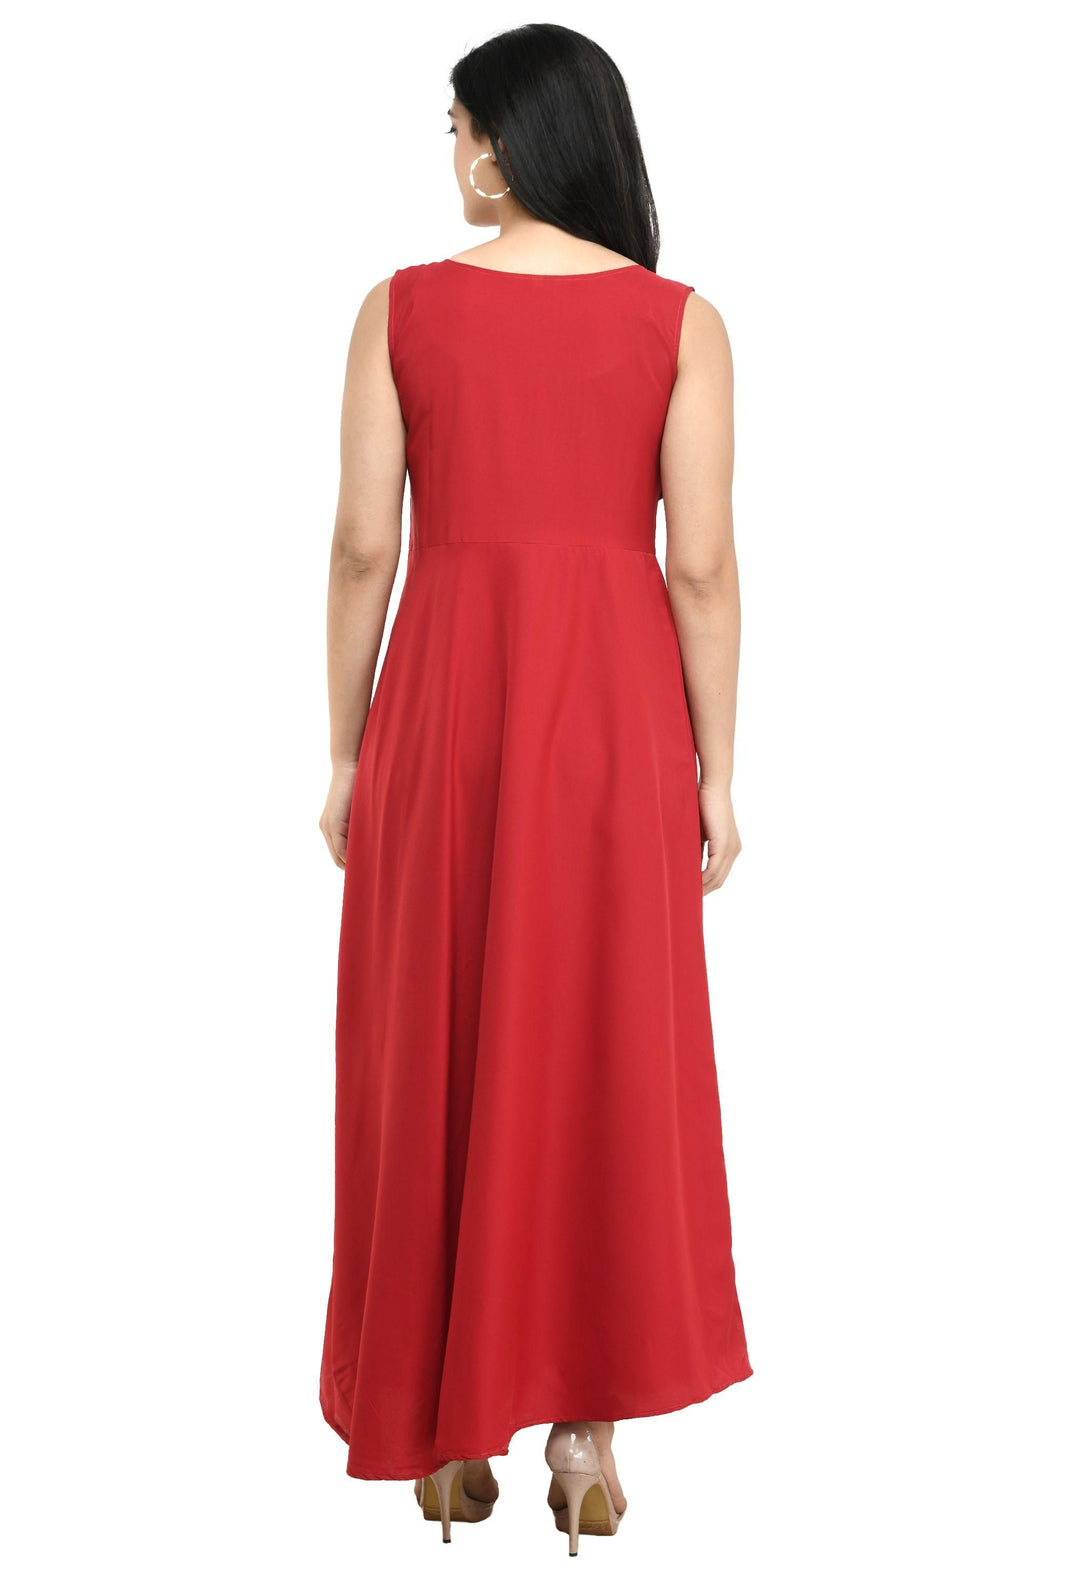 Oceanista Women's Crepe Embellished Partywear Red Maxi Dress